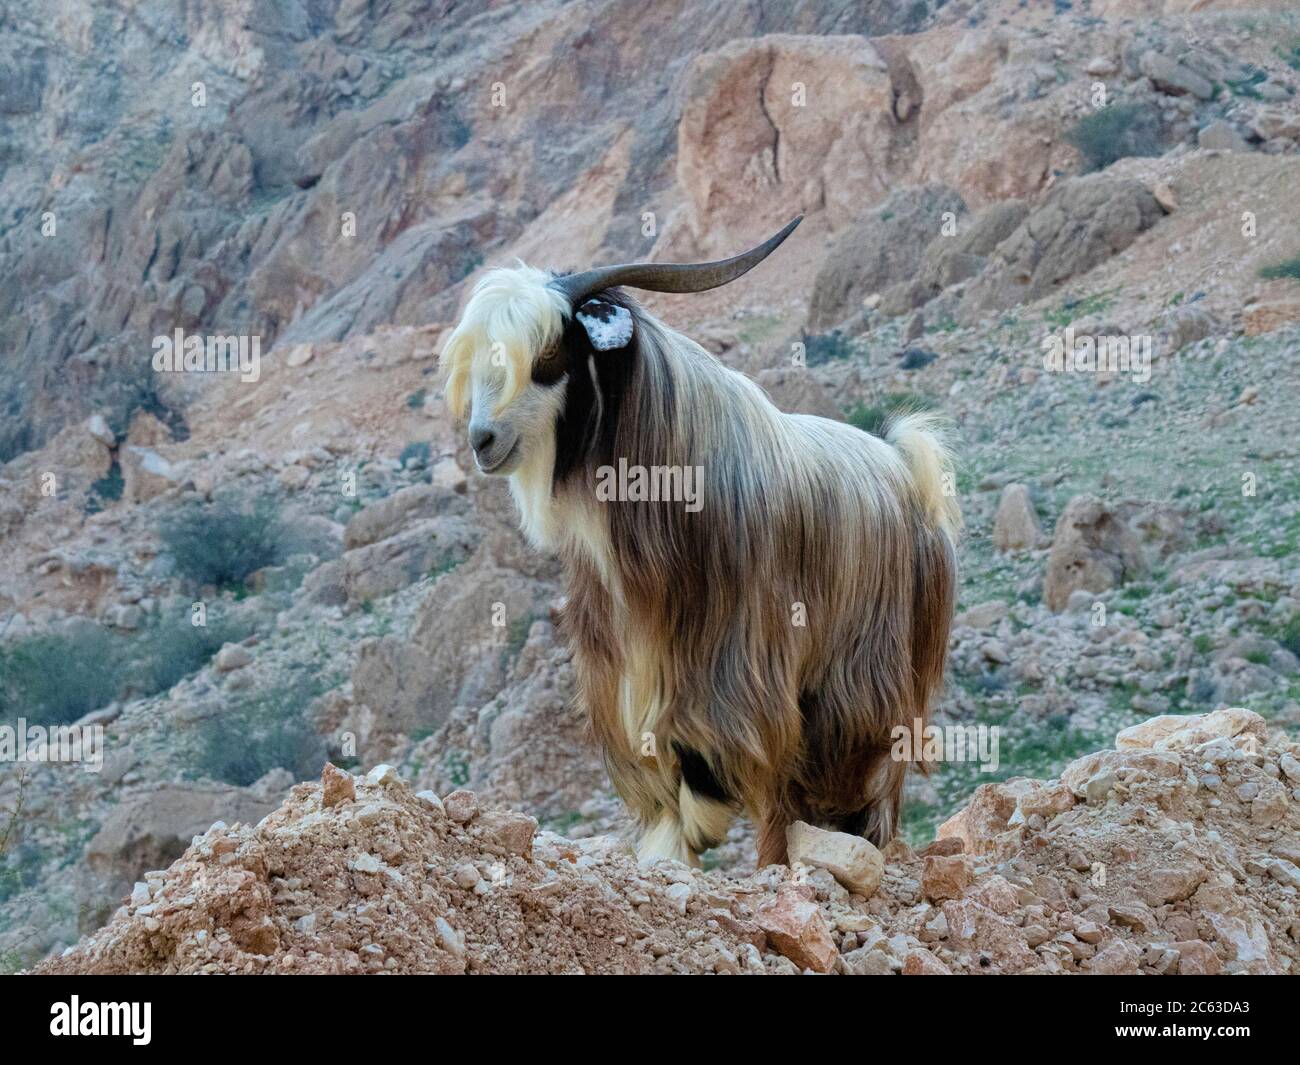 Goat on the mountain sides of Wadi Fins, Sultanate of Oman.; Stock Photo